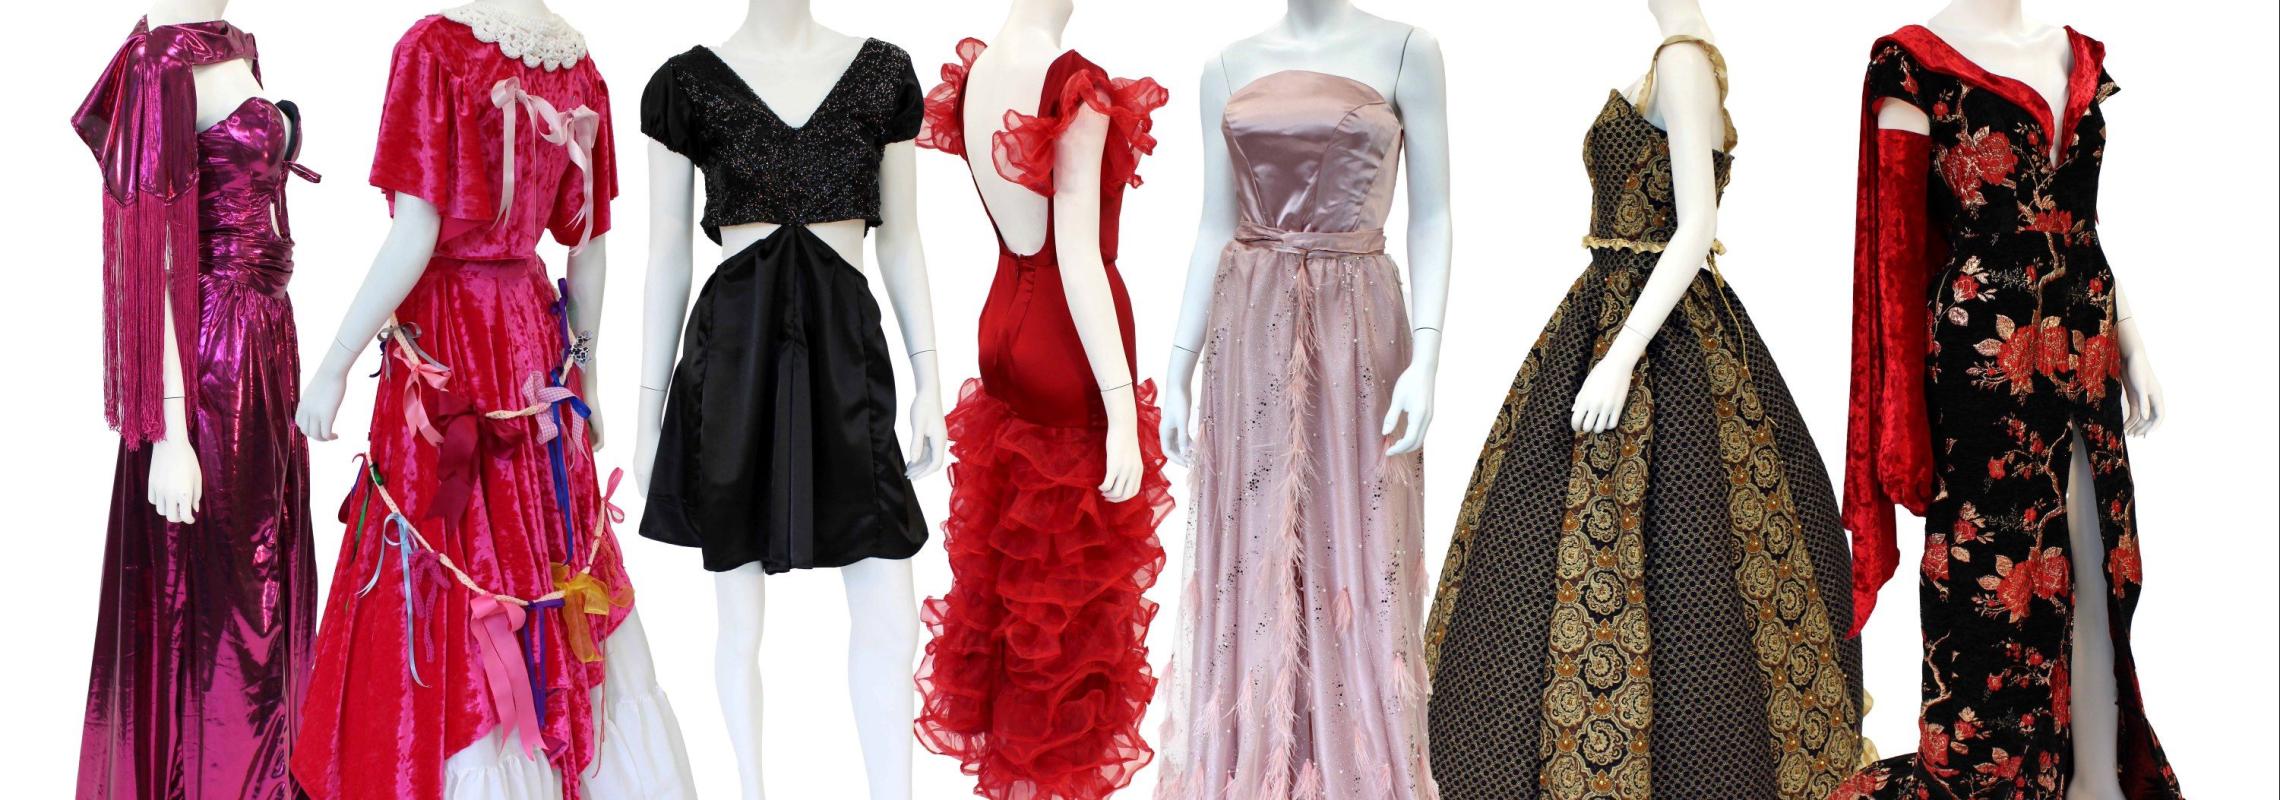 Ginger Rogers costume exhibition